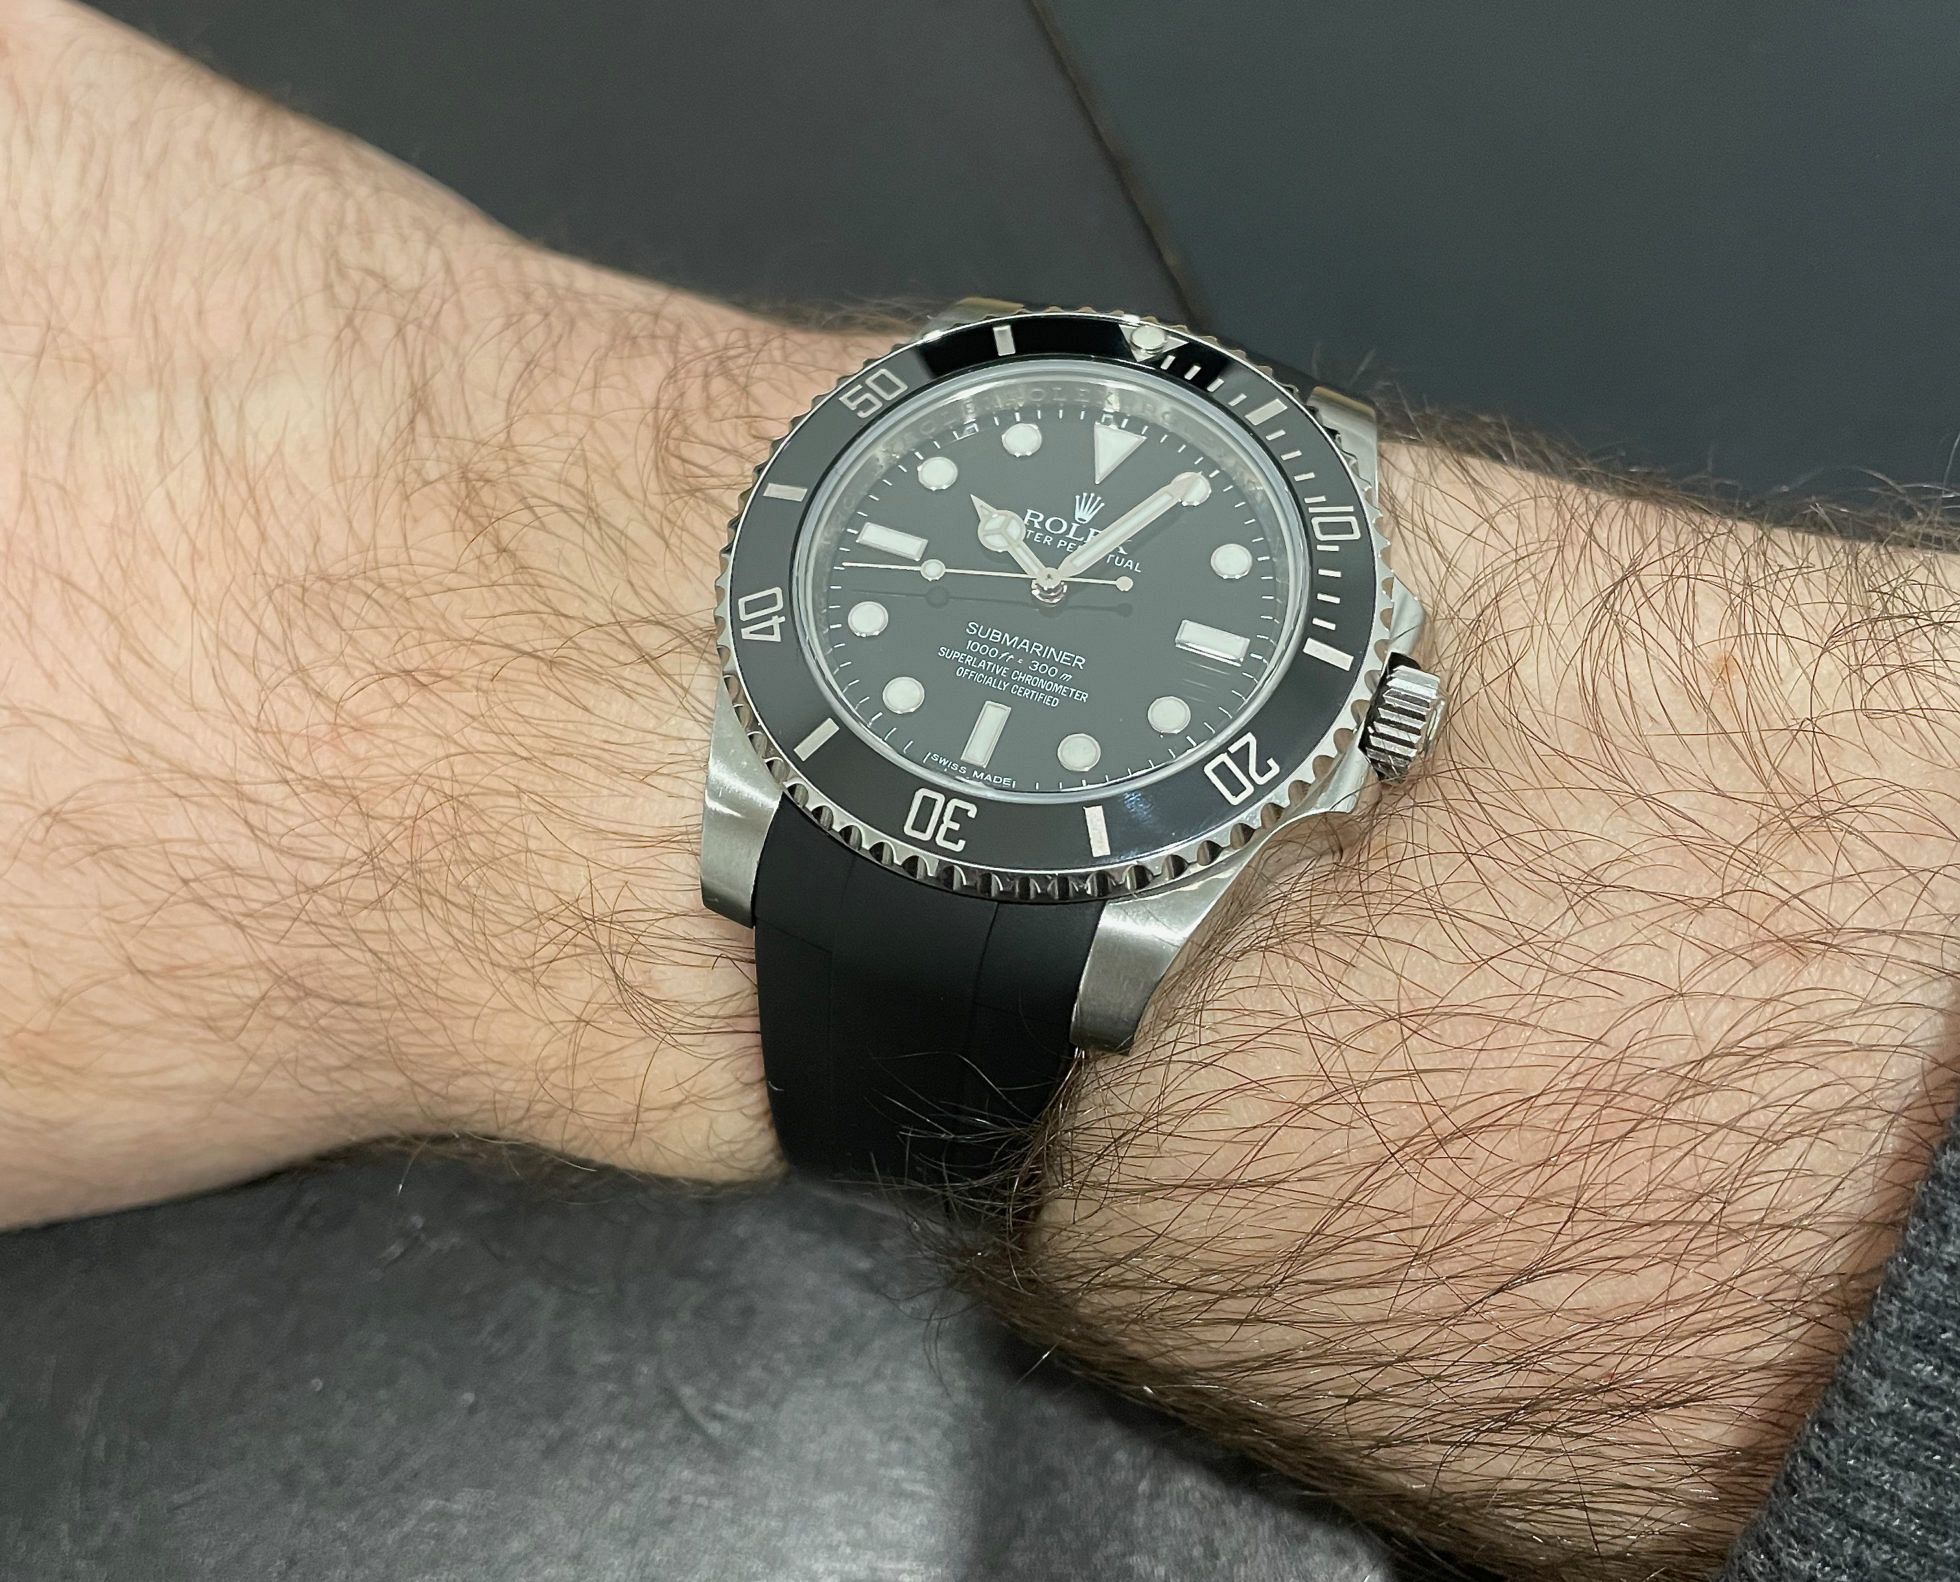 So shoot me, I like my Submariner on a rubber strap